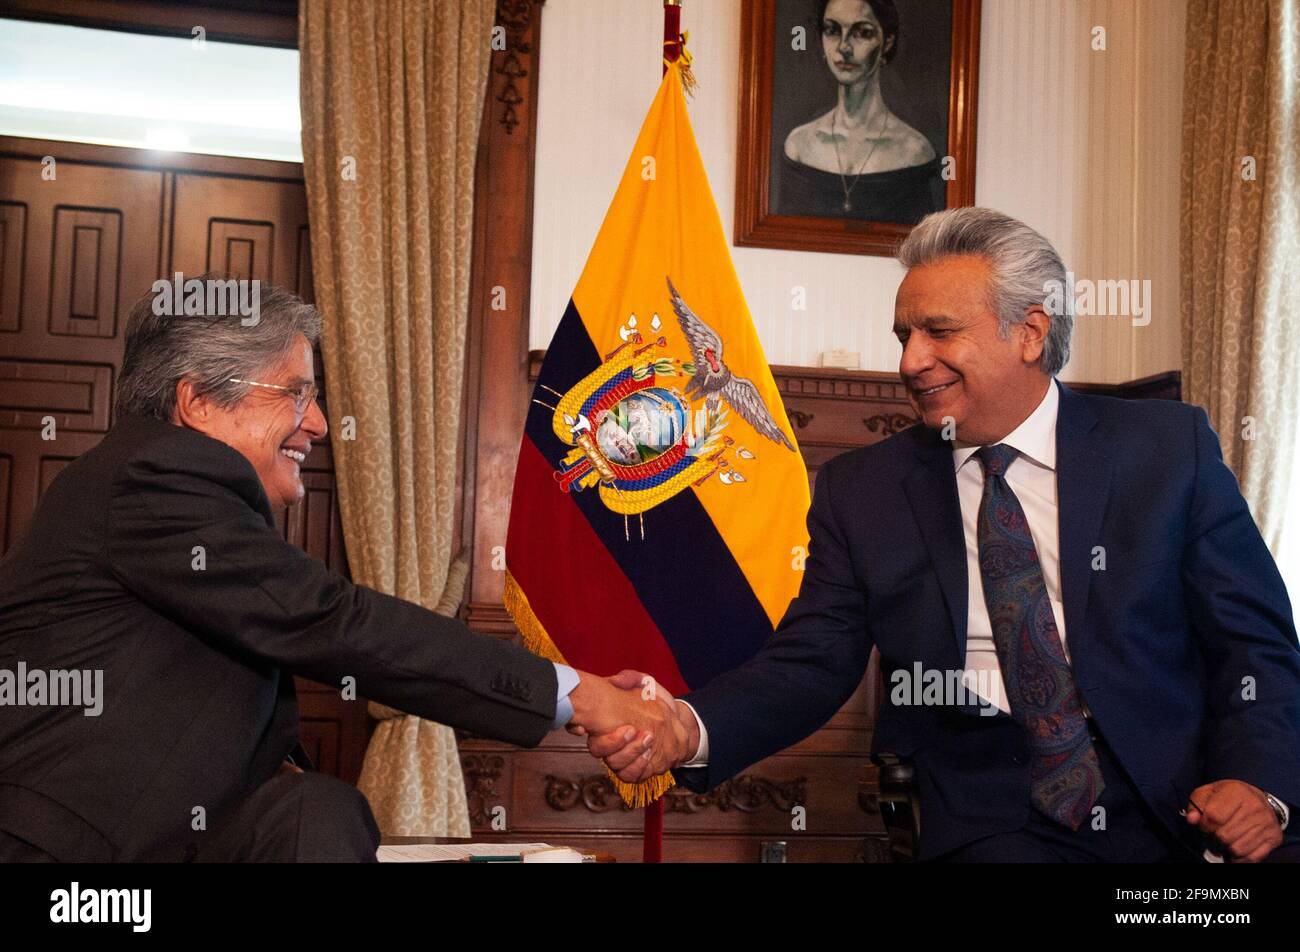 Lenin Moreno shakes hands with the elected president of Ecuador Guillermo Lasso during a meeting. The president-elect Guillermo Lasso and the outgoing president of Ecuador Lenin Moreno held a meeting in the framework of the transition of power in this activity were present Rocio de Moreno first lady and Lourdes Alcivar wife of Lasso, also were the vice president María Alejandra Muñoz the vice president starter Alfredo Borrero and his wife Lucia Pazmiño. Stock Photo